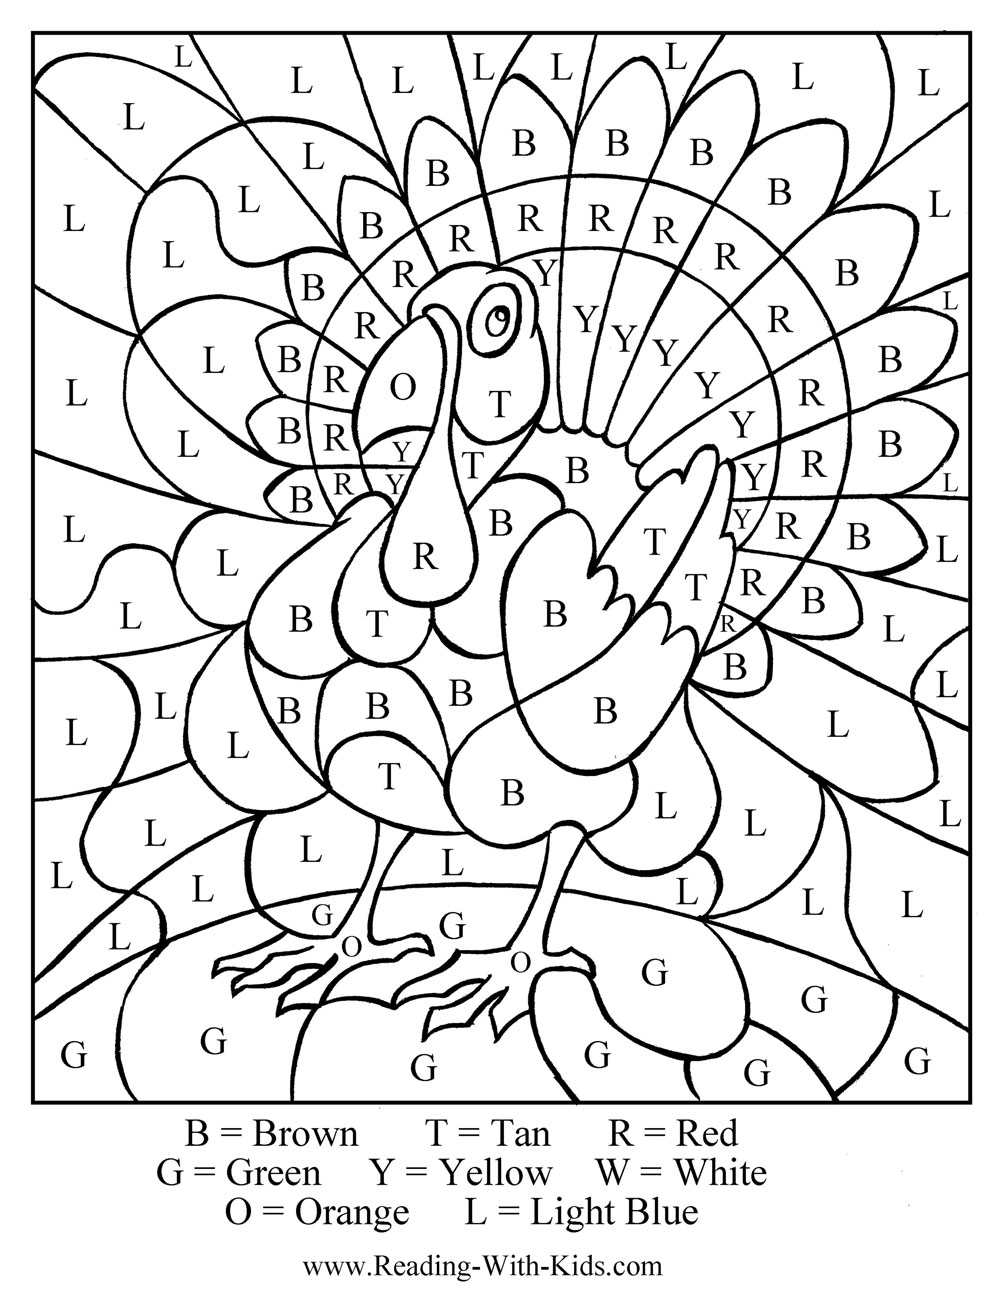 Munchkins and Mayhem: Thanksgiving Coloring by Number Pages